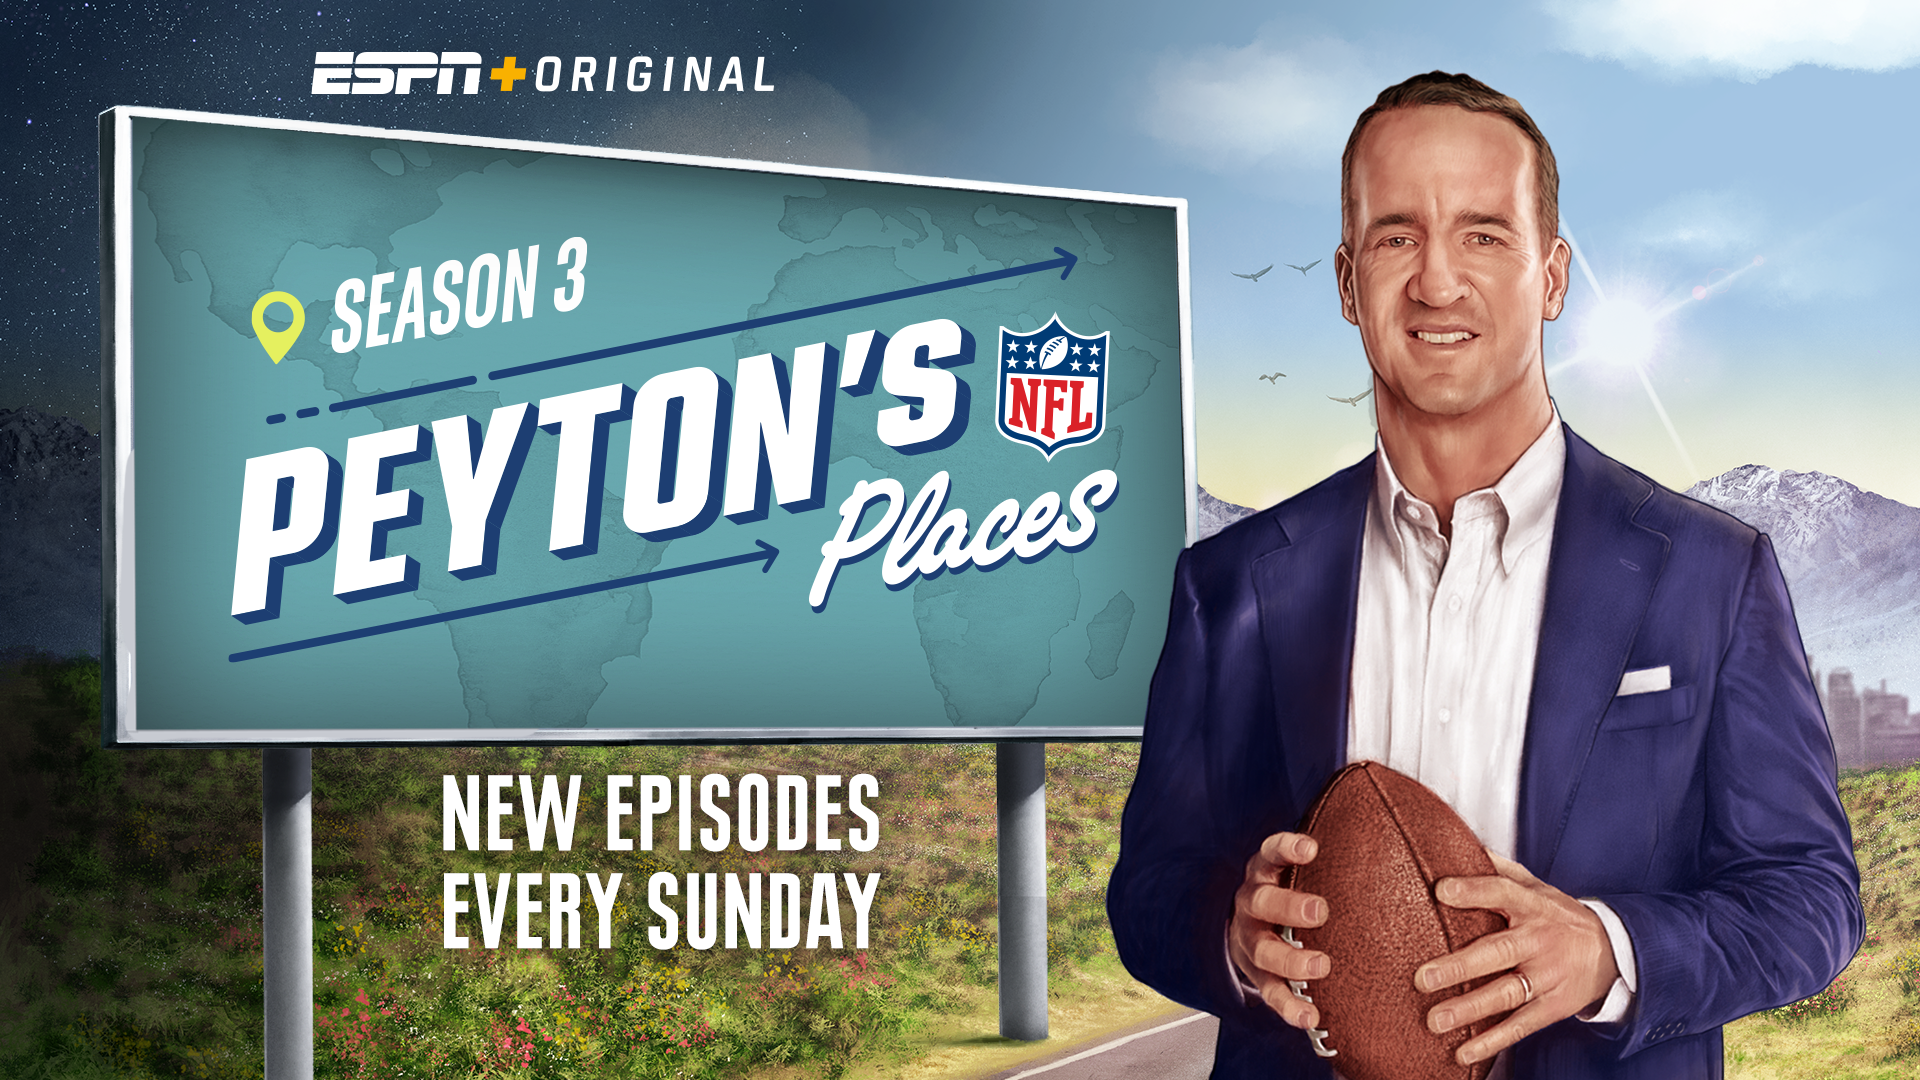 A graphic showing the logo for "Peyton's place."